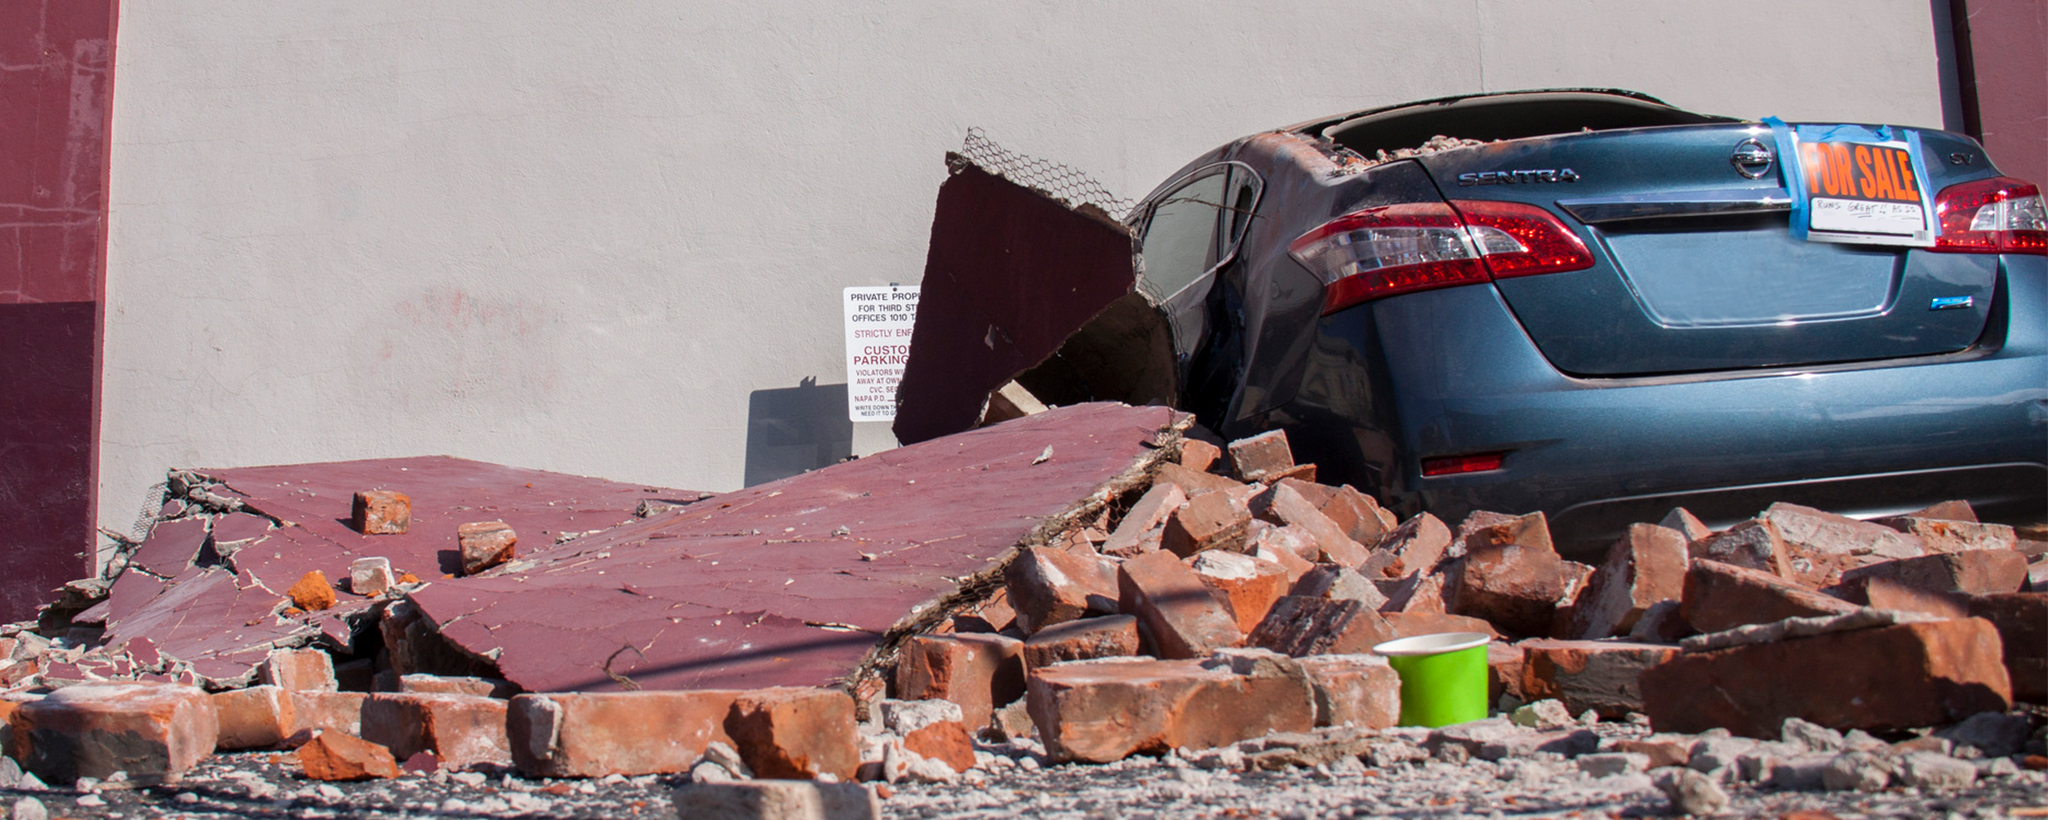 A car with a for sale sign heavily damaged by falling bricks and other debris during an earthquake